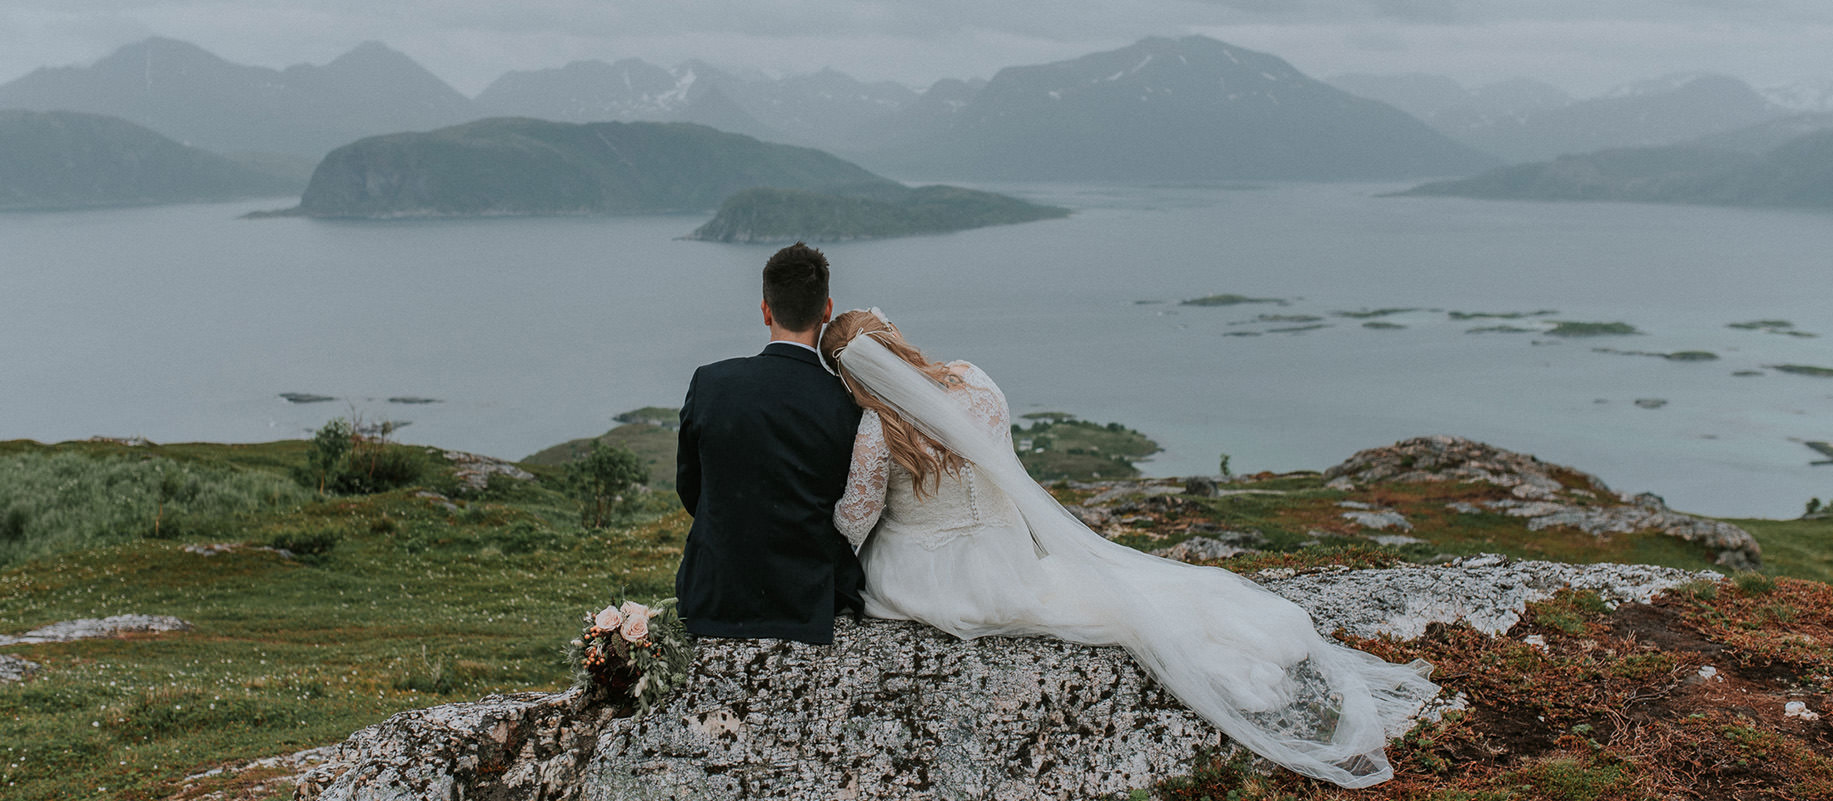 Bride and groom sitting on rocks on a mountaintop in Sommarøy - captured by Tromsø wedding photographer TS Foto Design